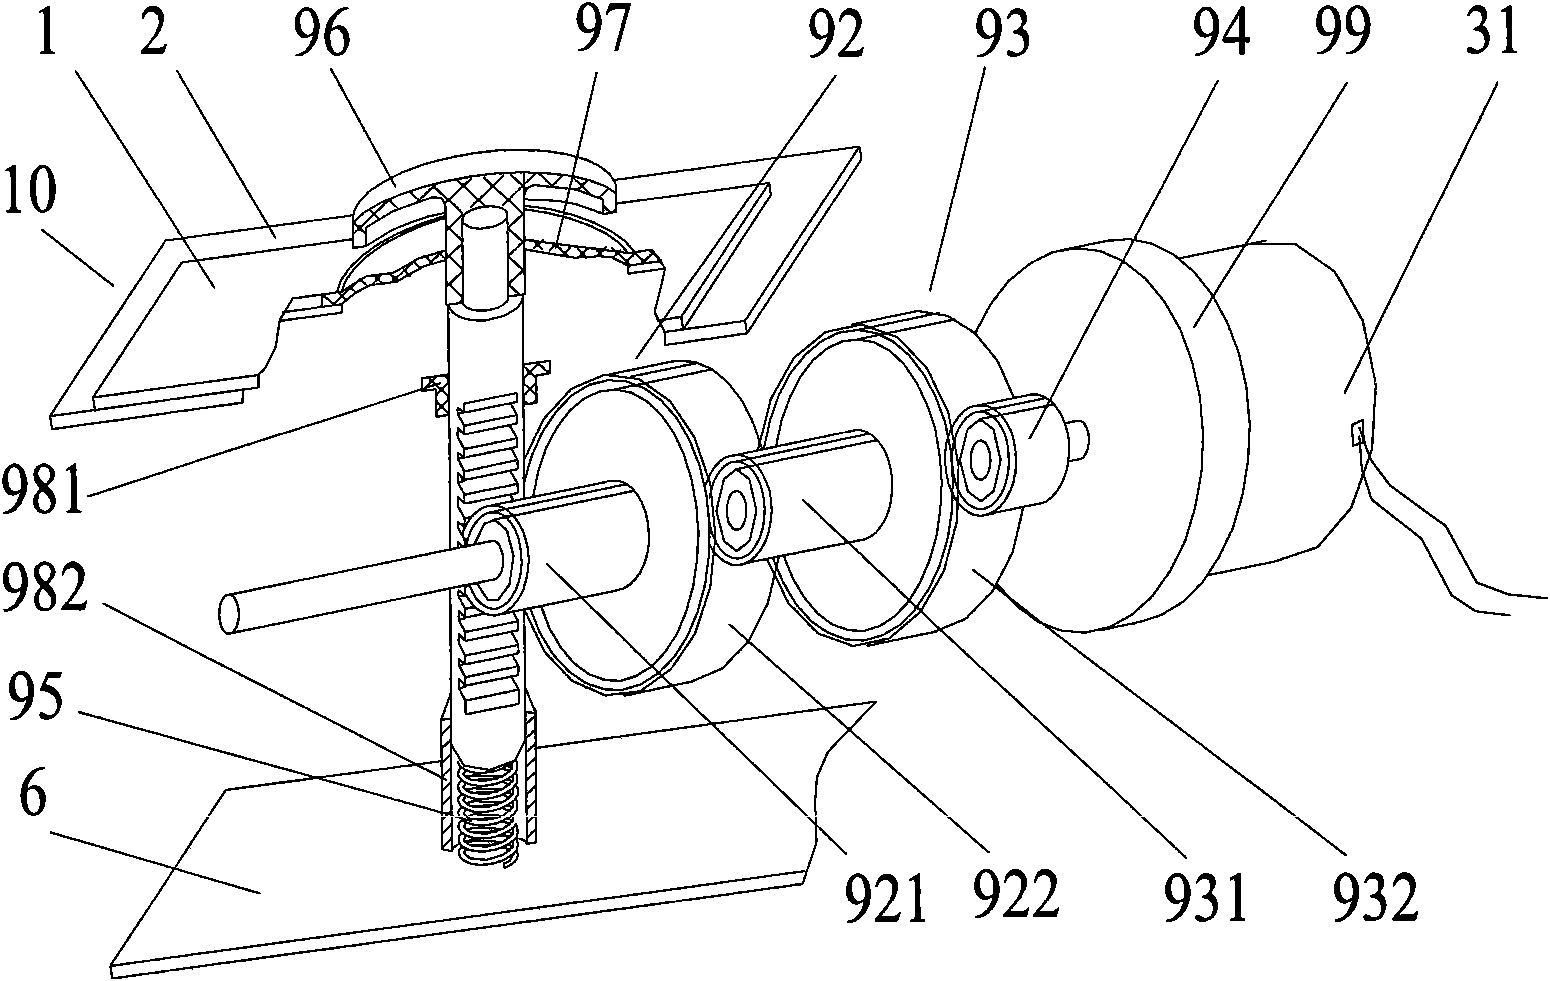 Electronic scale with self-powered function